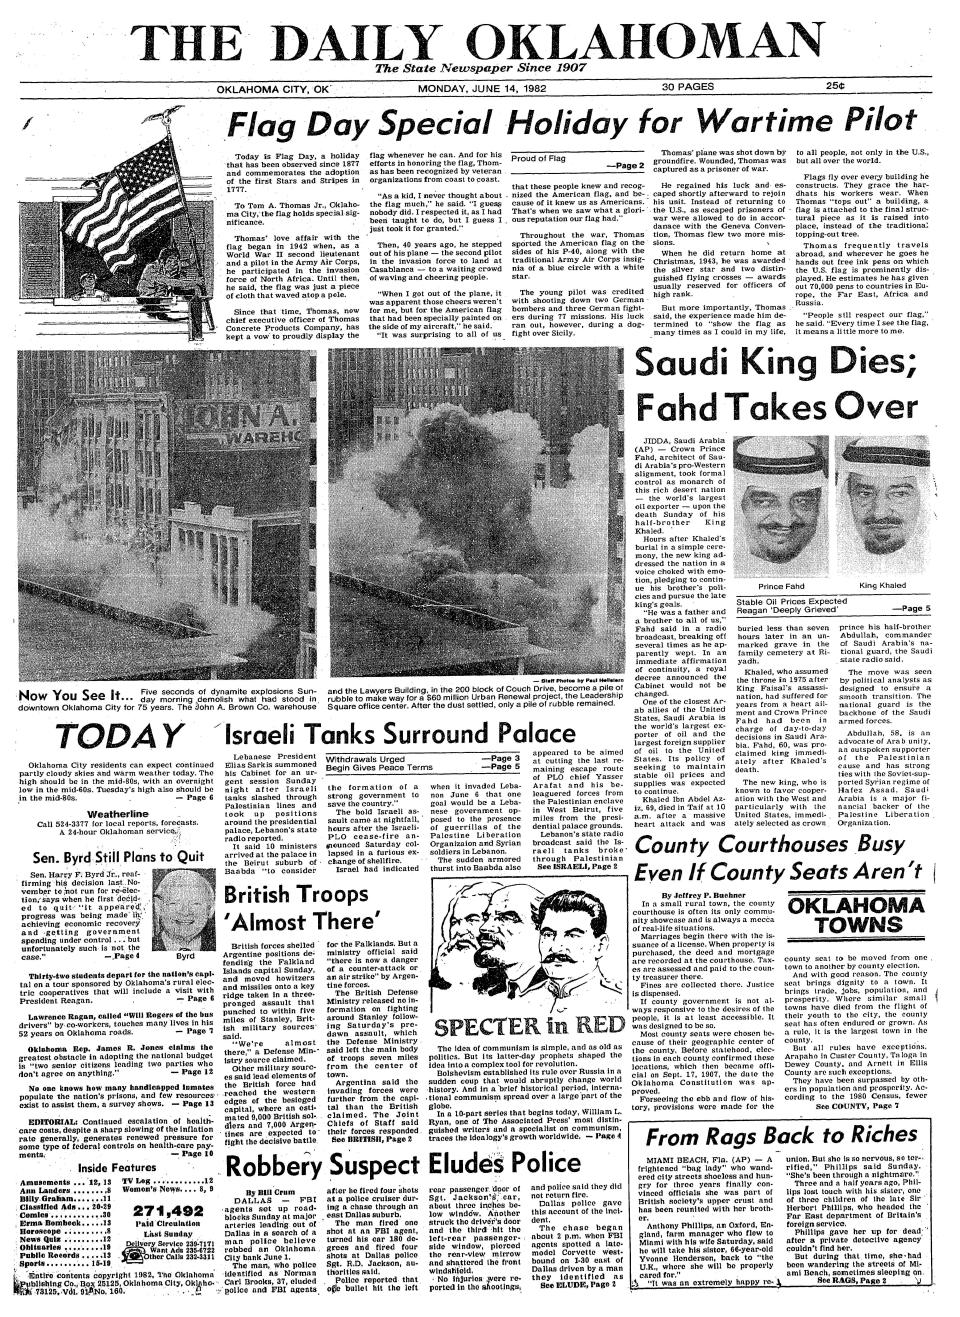 The front page of the June 14, 1982, edition of The Daily Oklahoman featured the demolition of the John A. Brown warehouse, making way for the Leadership Square office center.